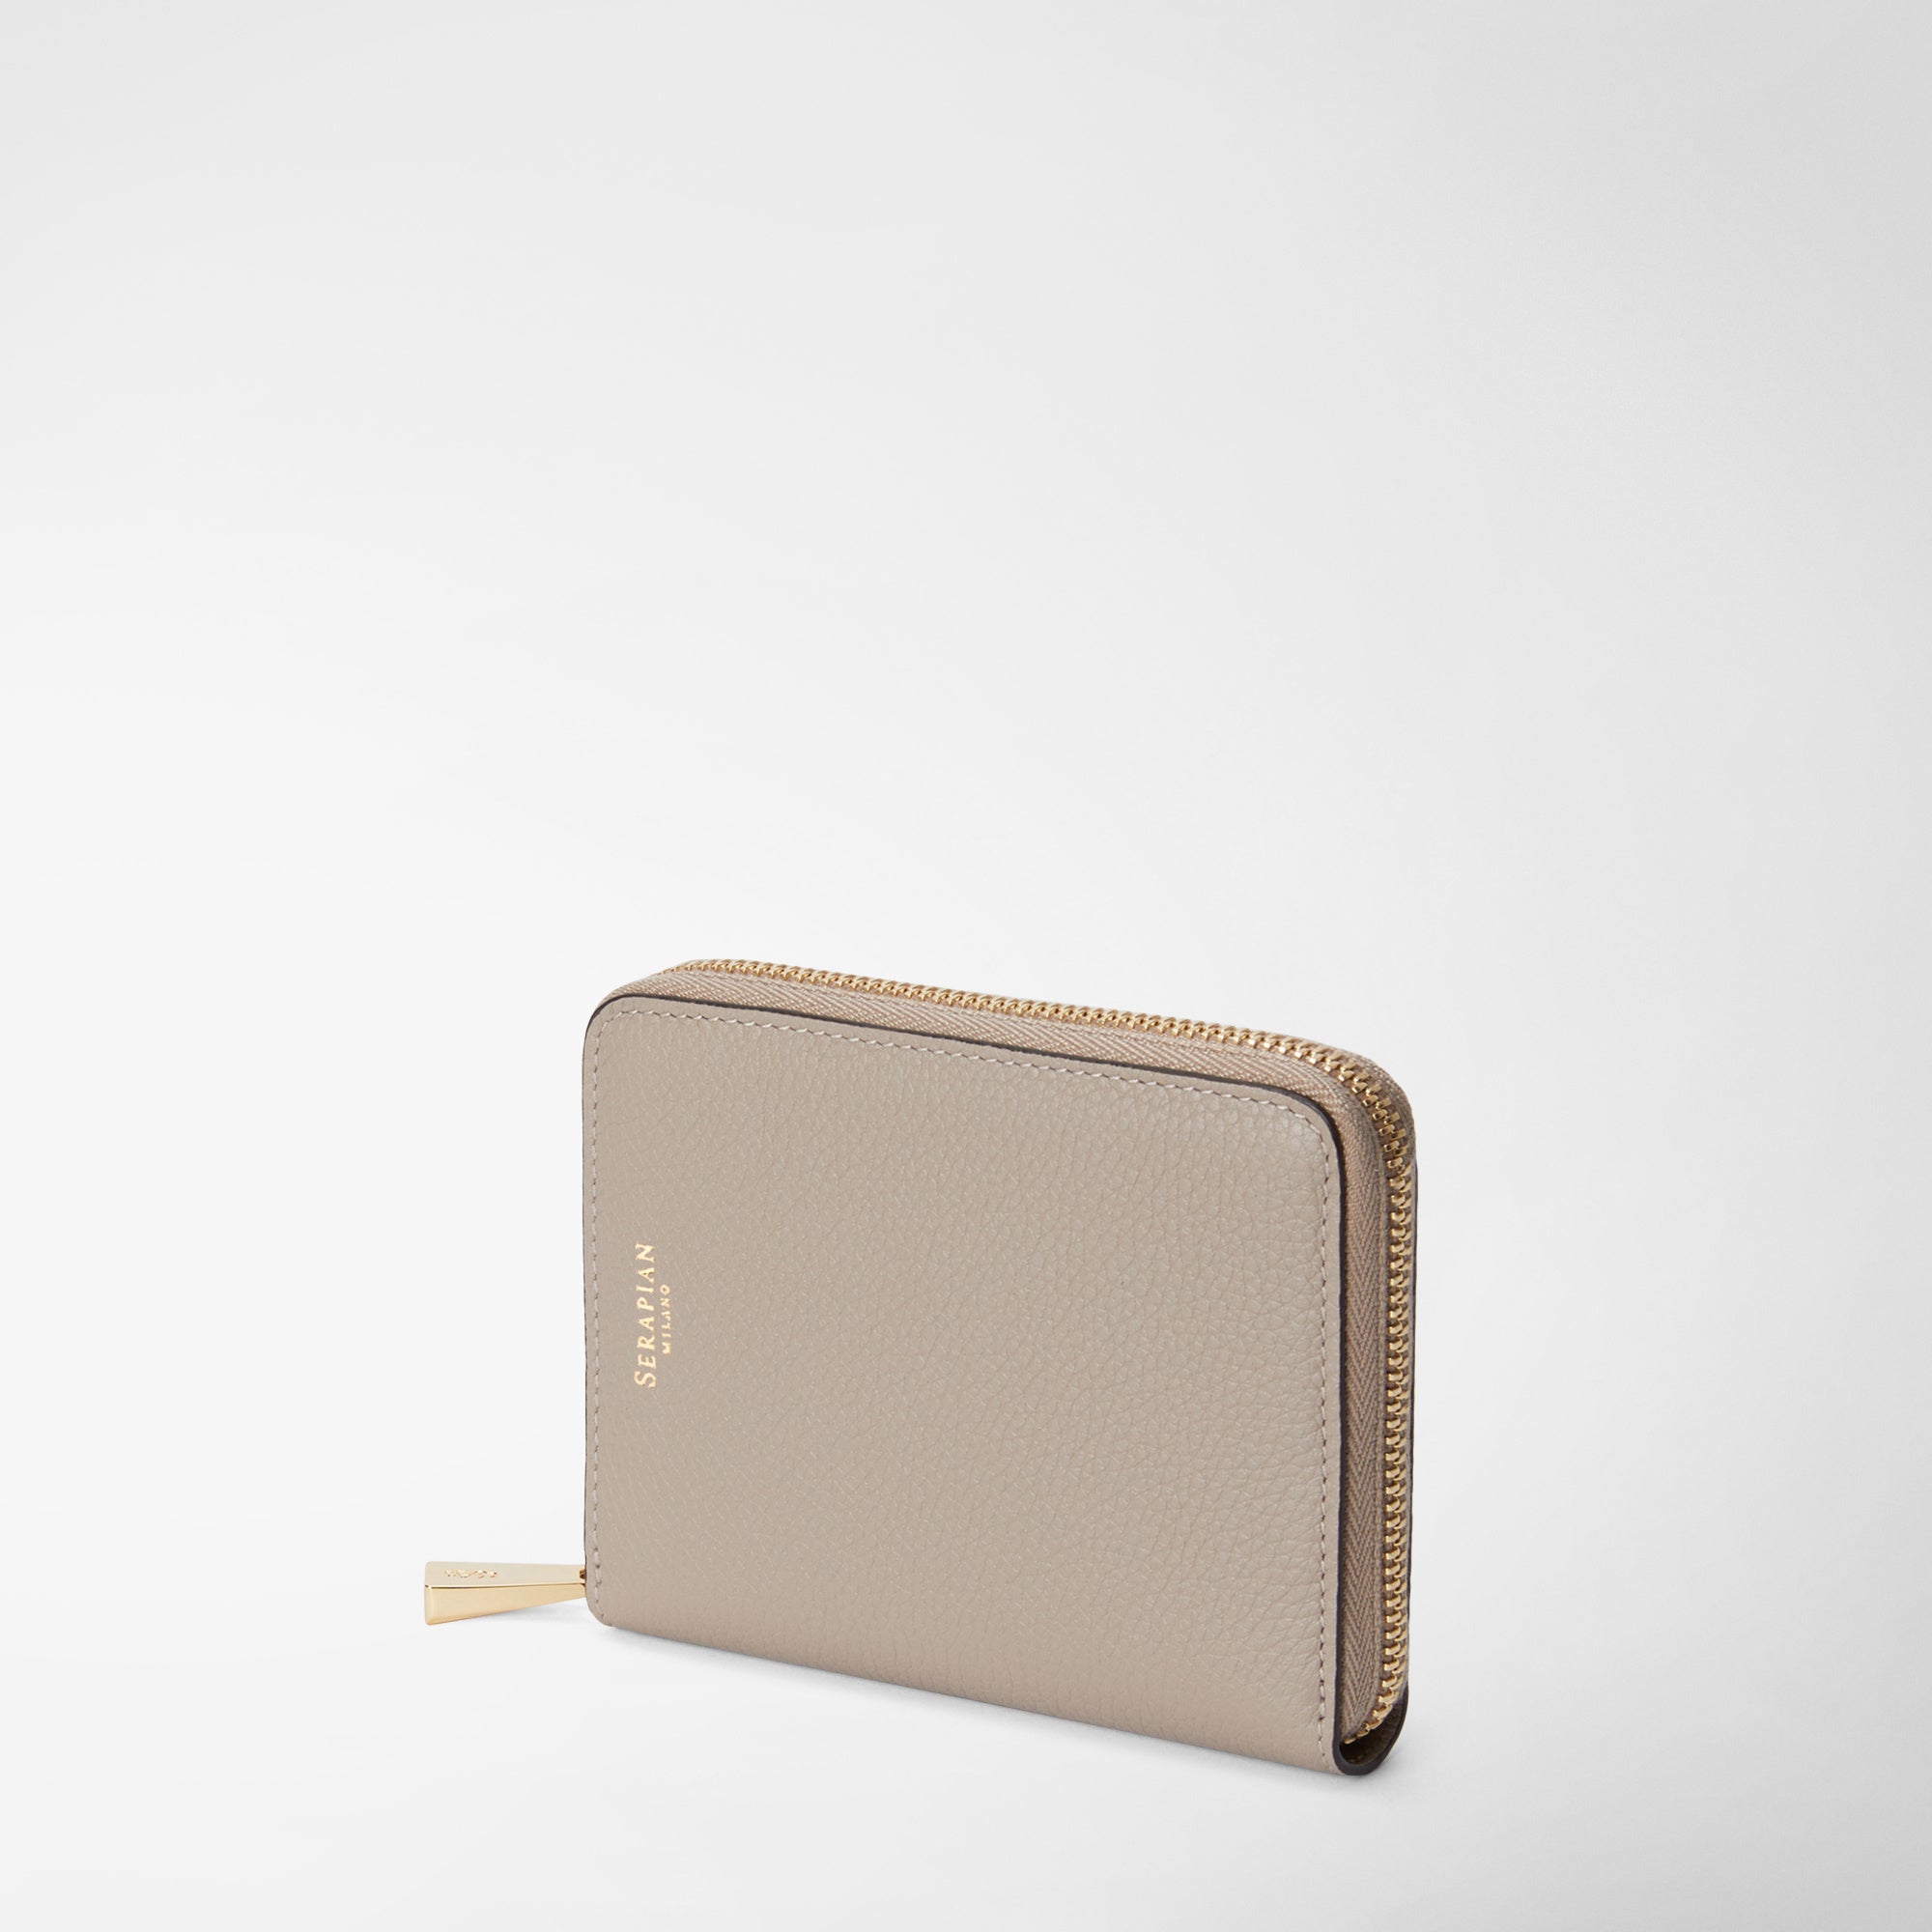 COMPACT ZIPPED WALLET IN GRAINED CALFSKIN - NUDE